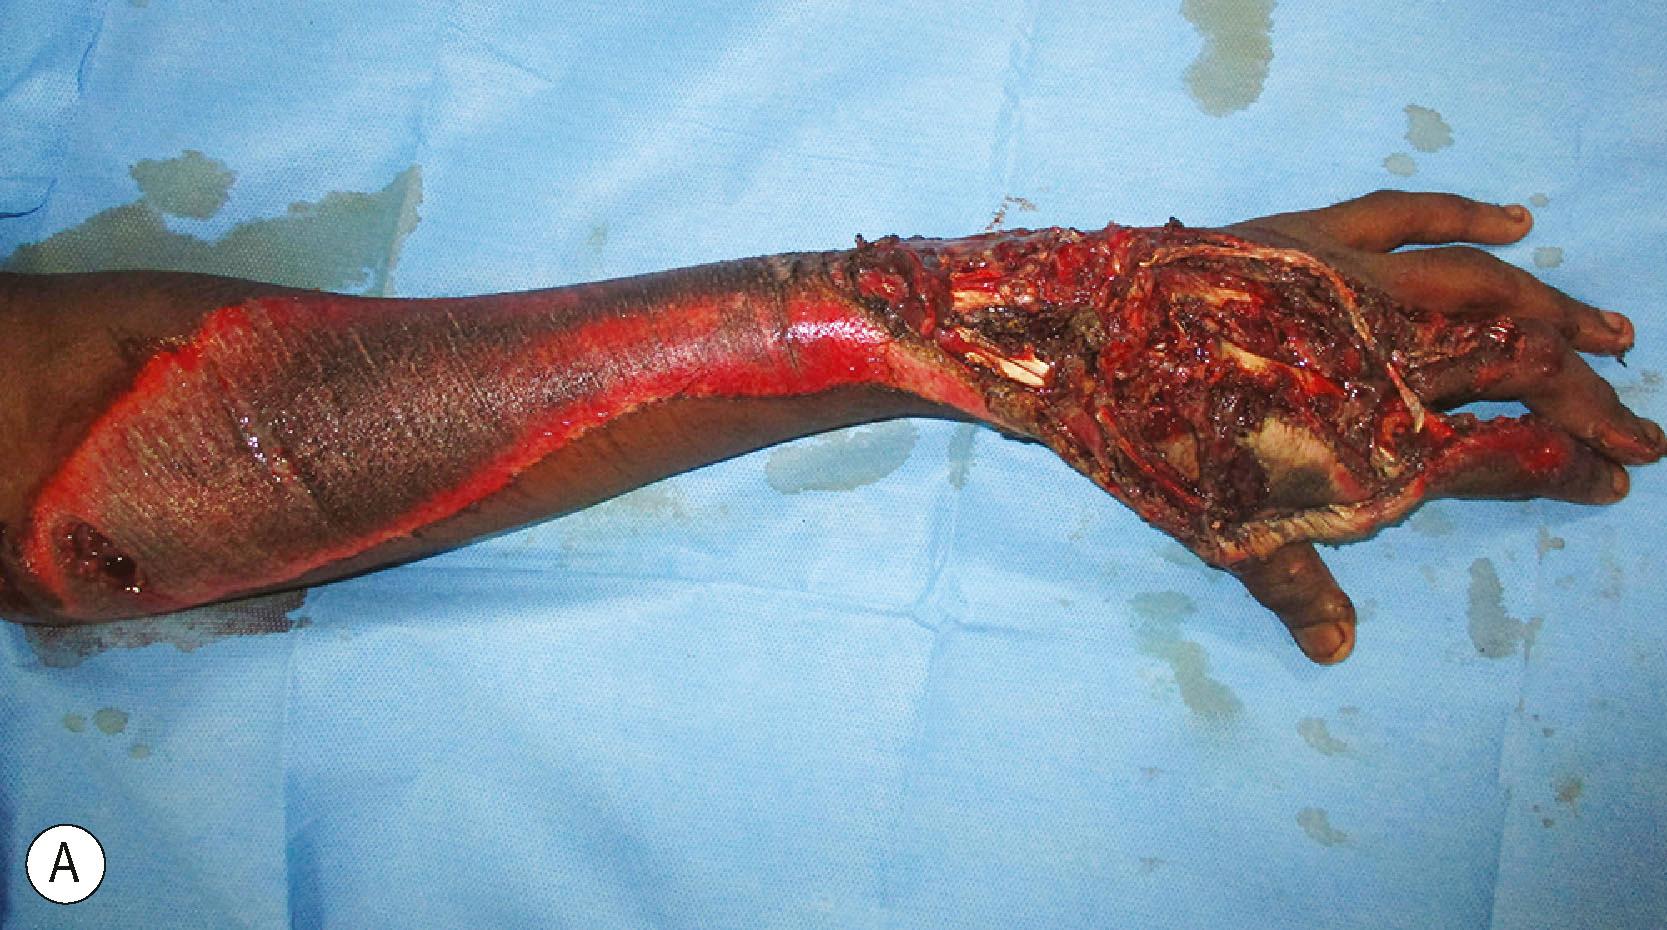 Figure 12.4, (A) Abrasive injury sustained in a road traffic accident with gross contamination. (B) The hand showing loss of skin and extensors and open joints. (C,D) The status post debridement (retaining only viable tissues). The contaminated abraded proximal area is shaved off to remove the contaminants. Critical raw areas were covered with flap and the rest of the raw area covered with skin graft, and extensor tendon reconstructed with fascia lata tendon grafts. (E,F) Post extensor tendon reconstruction with stable wrist, active finger extension, and good flexion of all fingers.